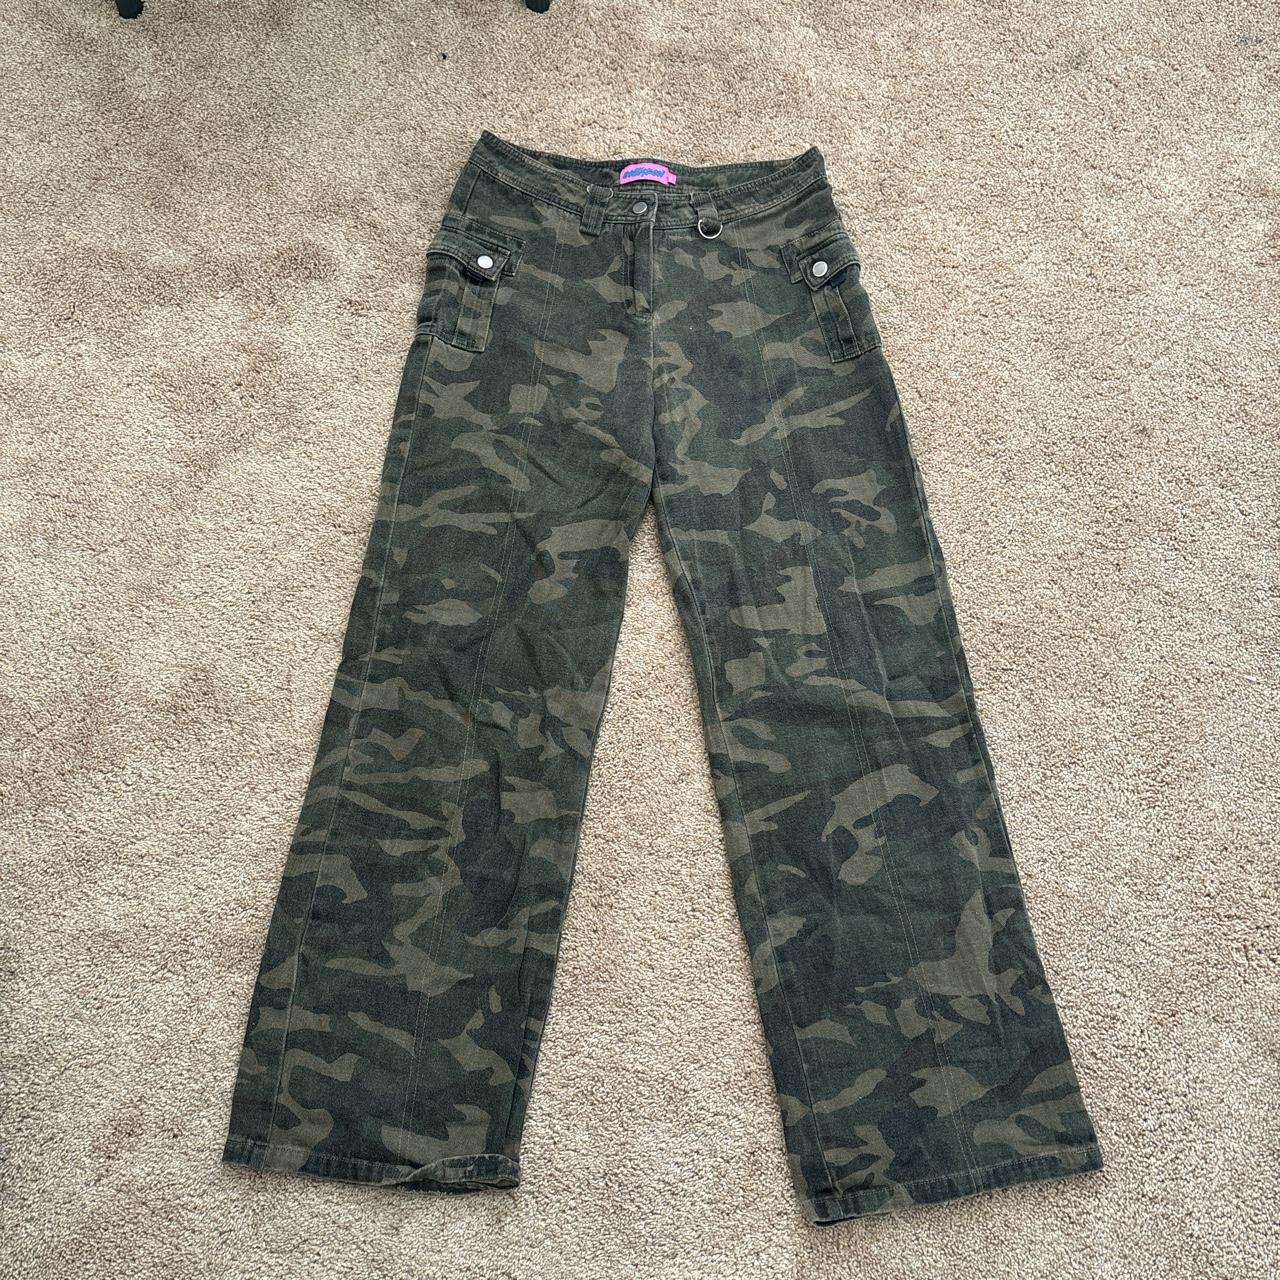 Edikted baggy low rise Camo pants! Worn only 1... - Depop